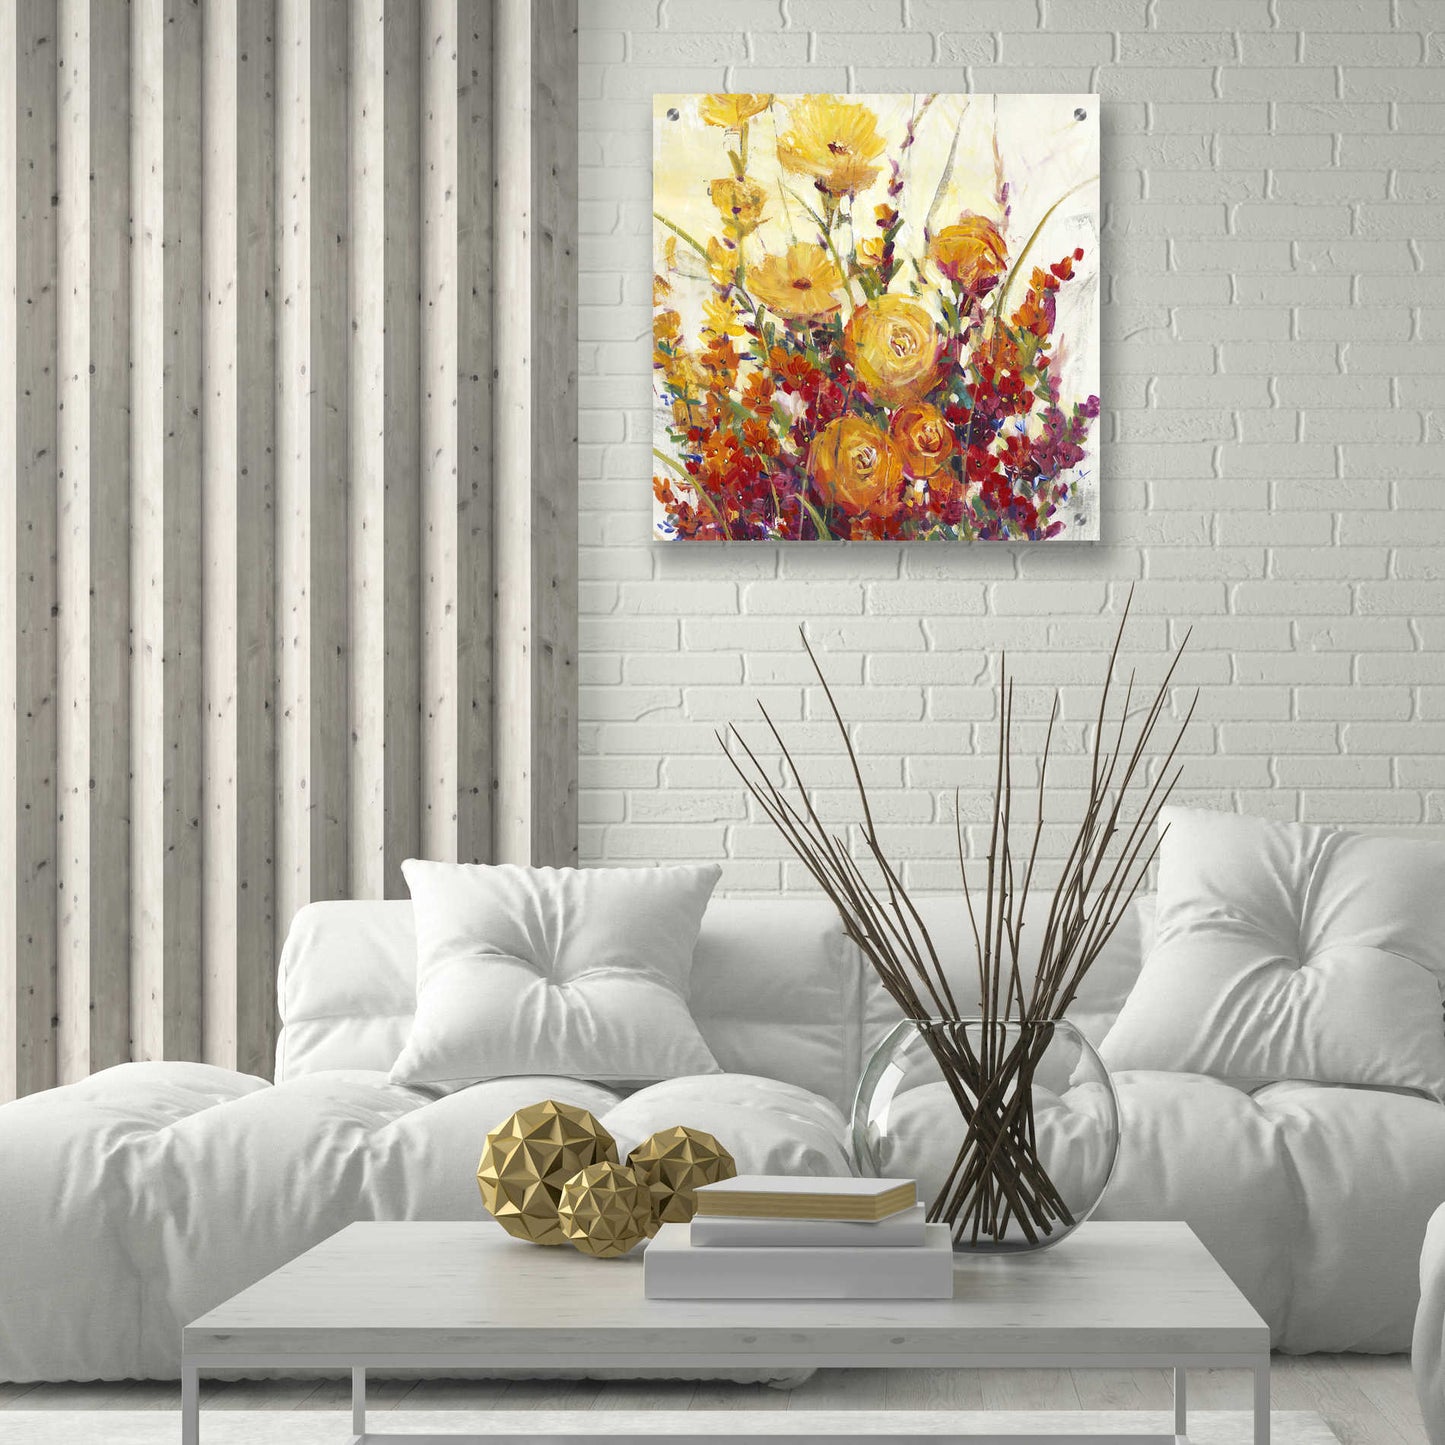 Epic Art 'Mixed Bouquet I' by Tim O'Toole, Acrylic Glass Wall Art,24x24